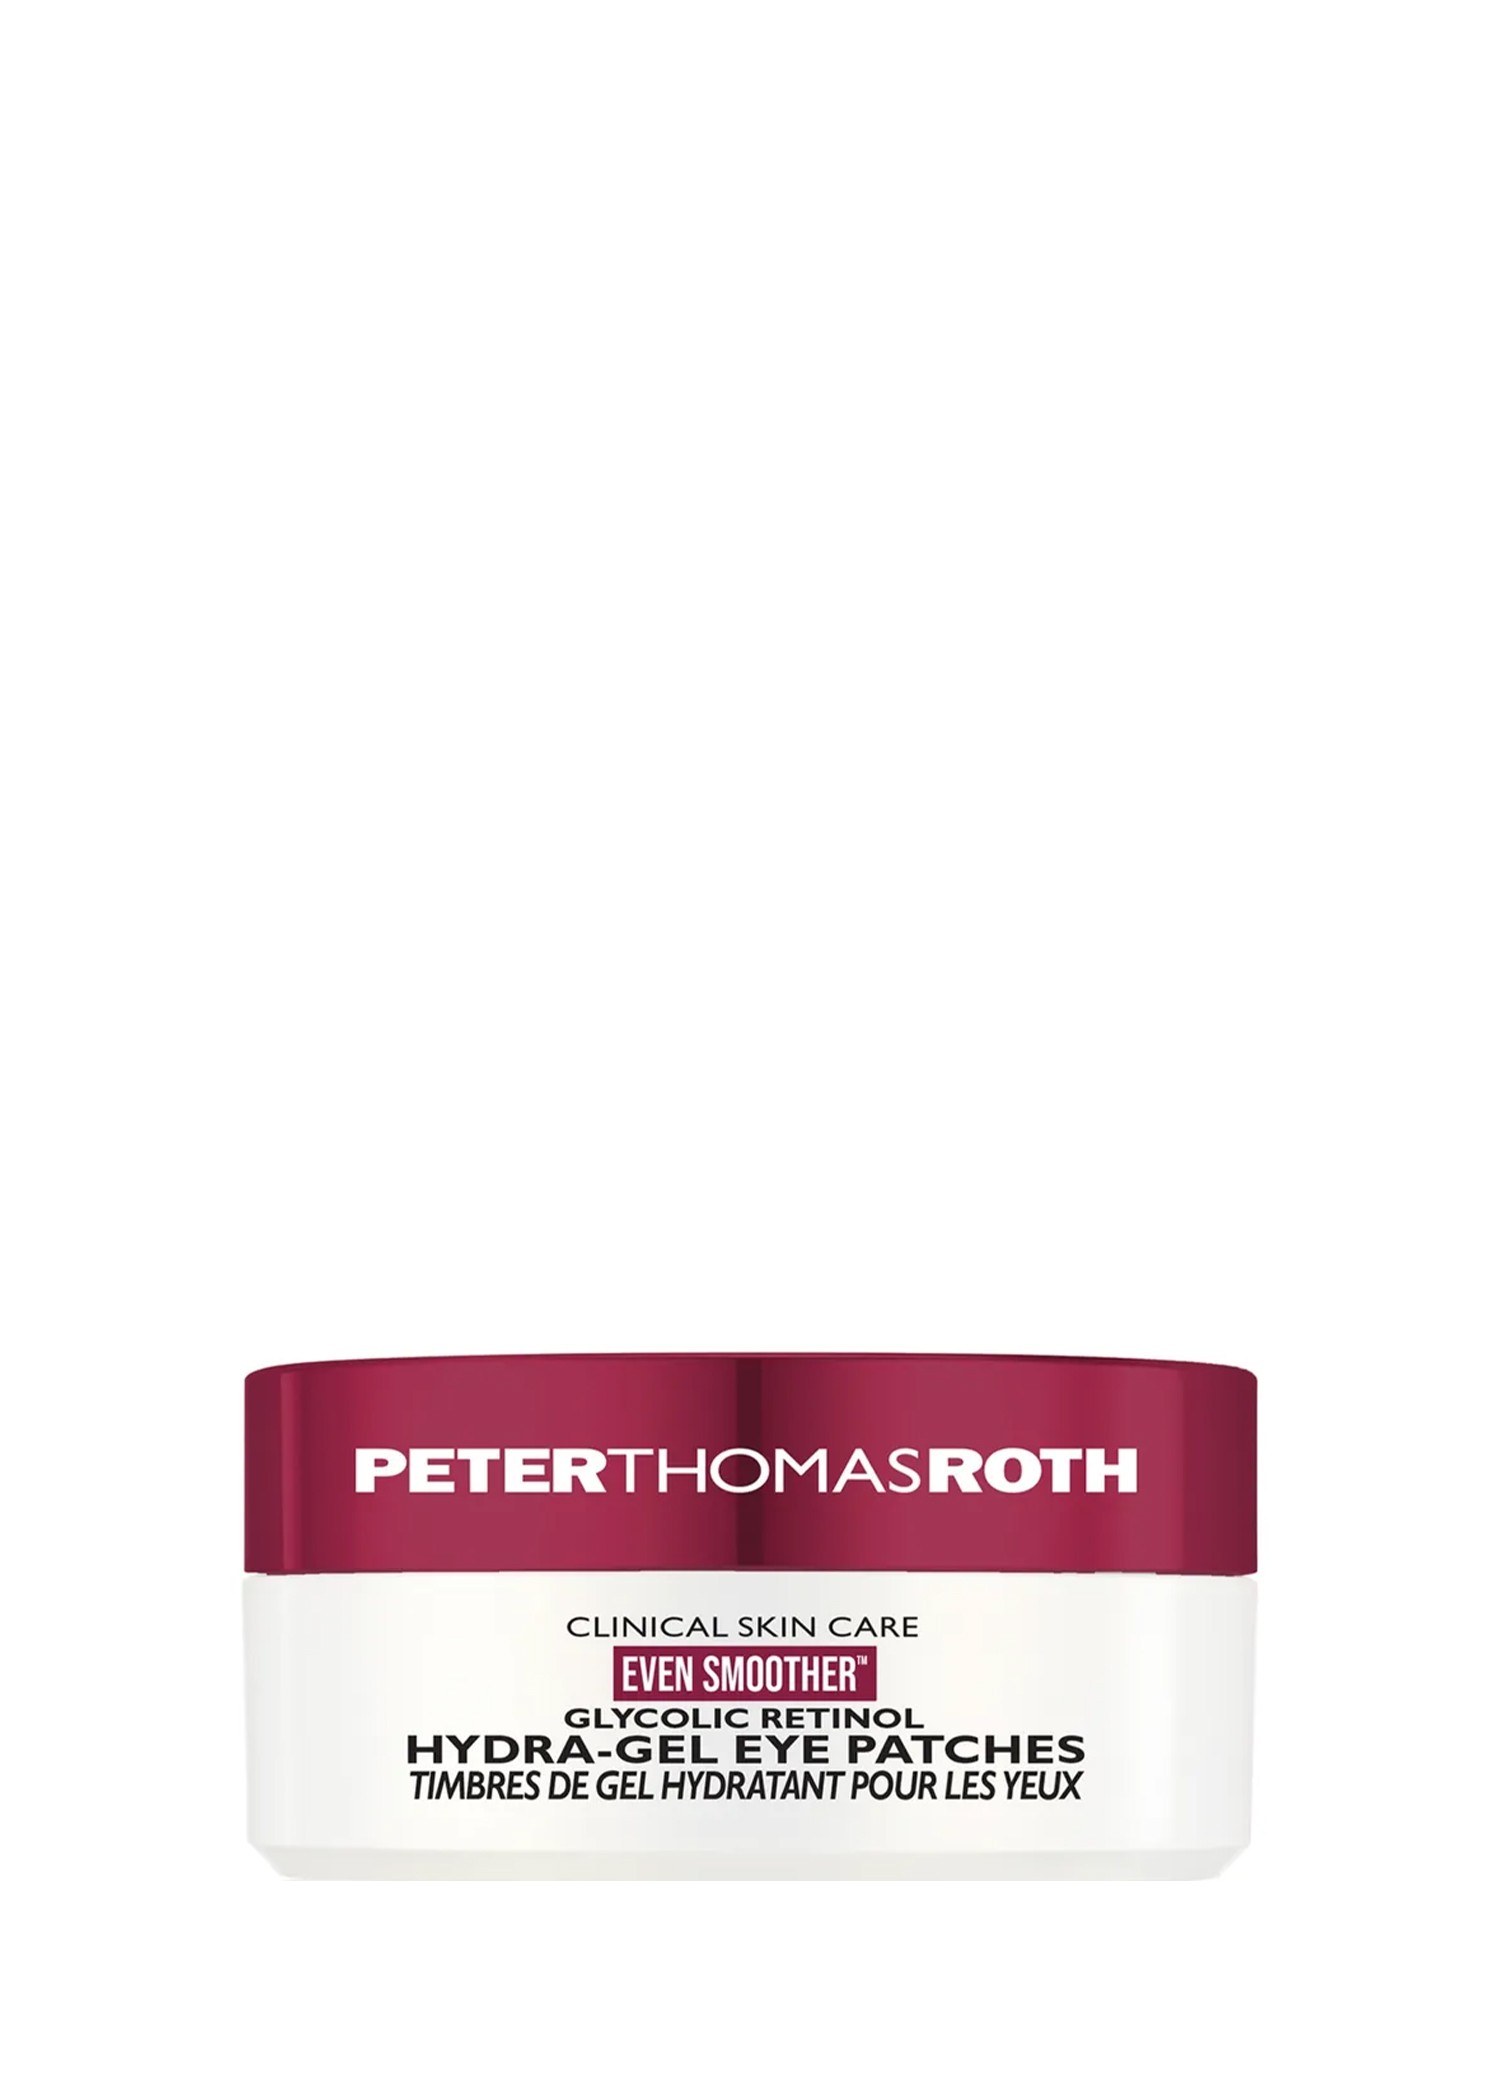 Even Smoother Glycolic Retinol Hydra-Gel Eye Patches 60 adet